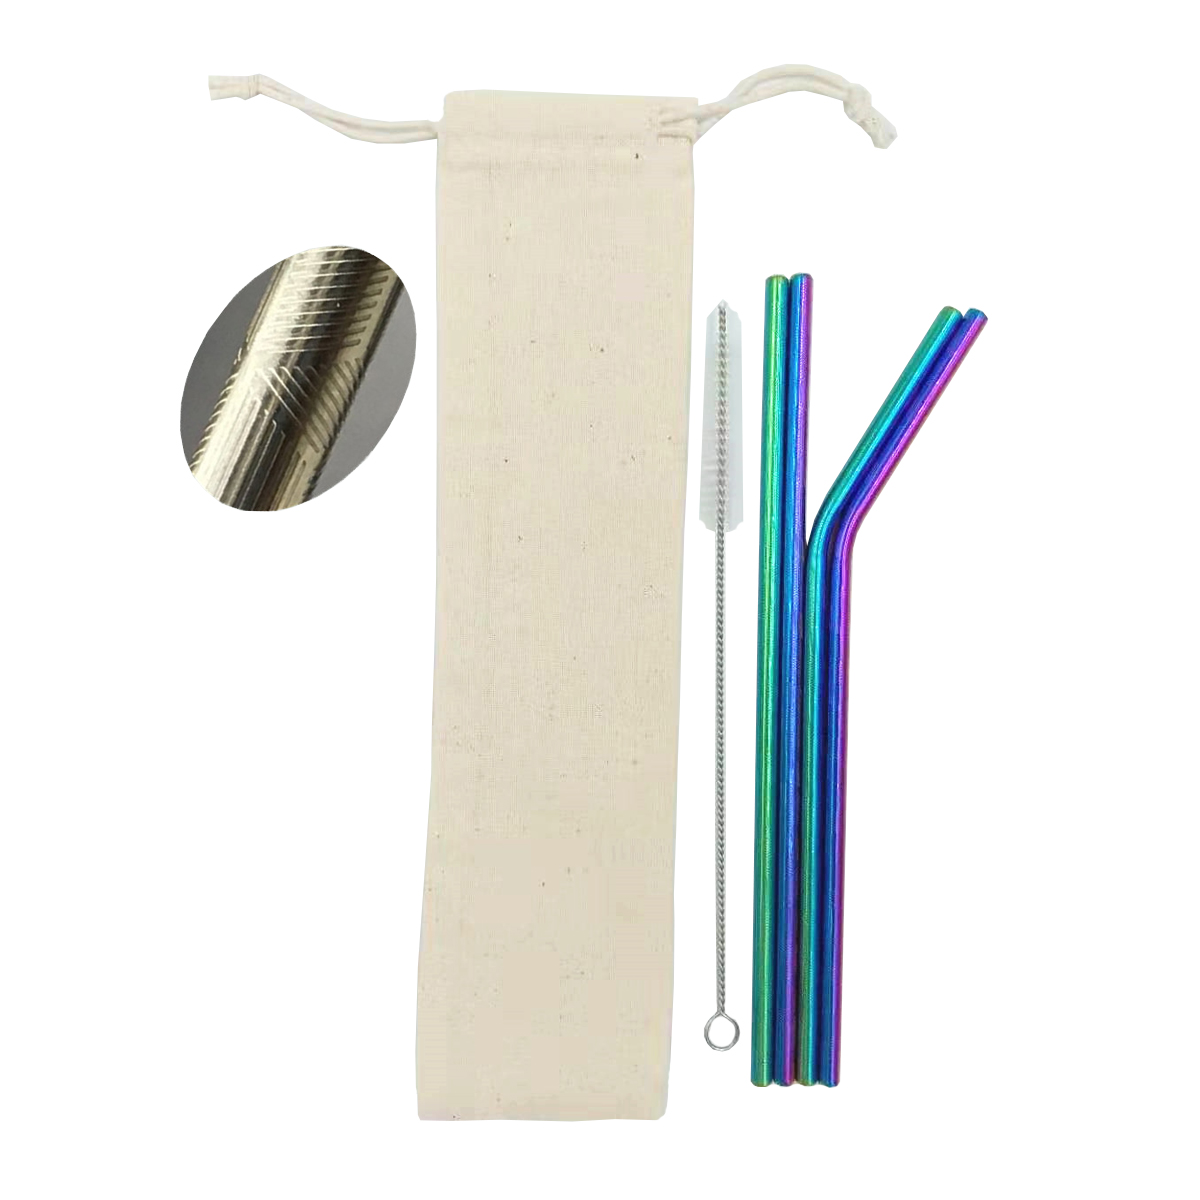 Colorful Stainless Steel Straw Set with decorative pattern